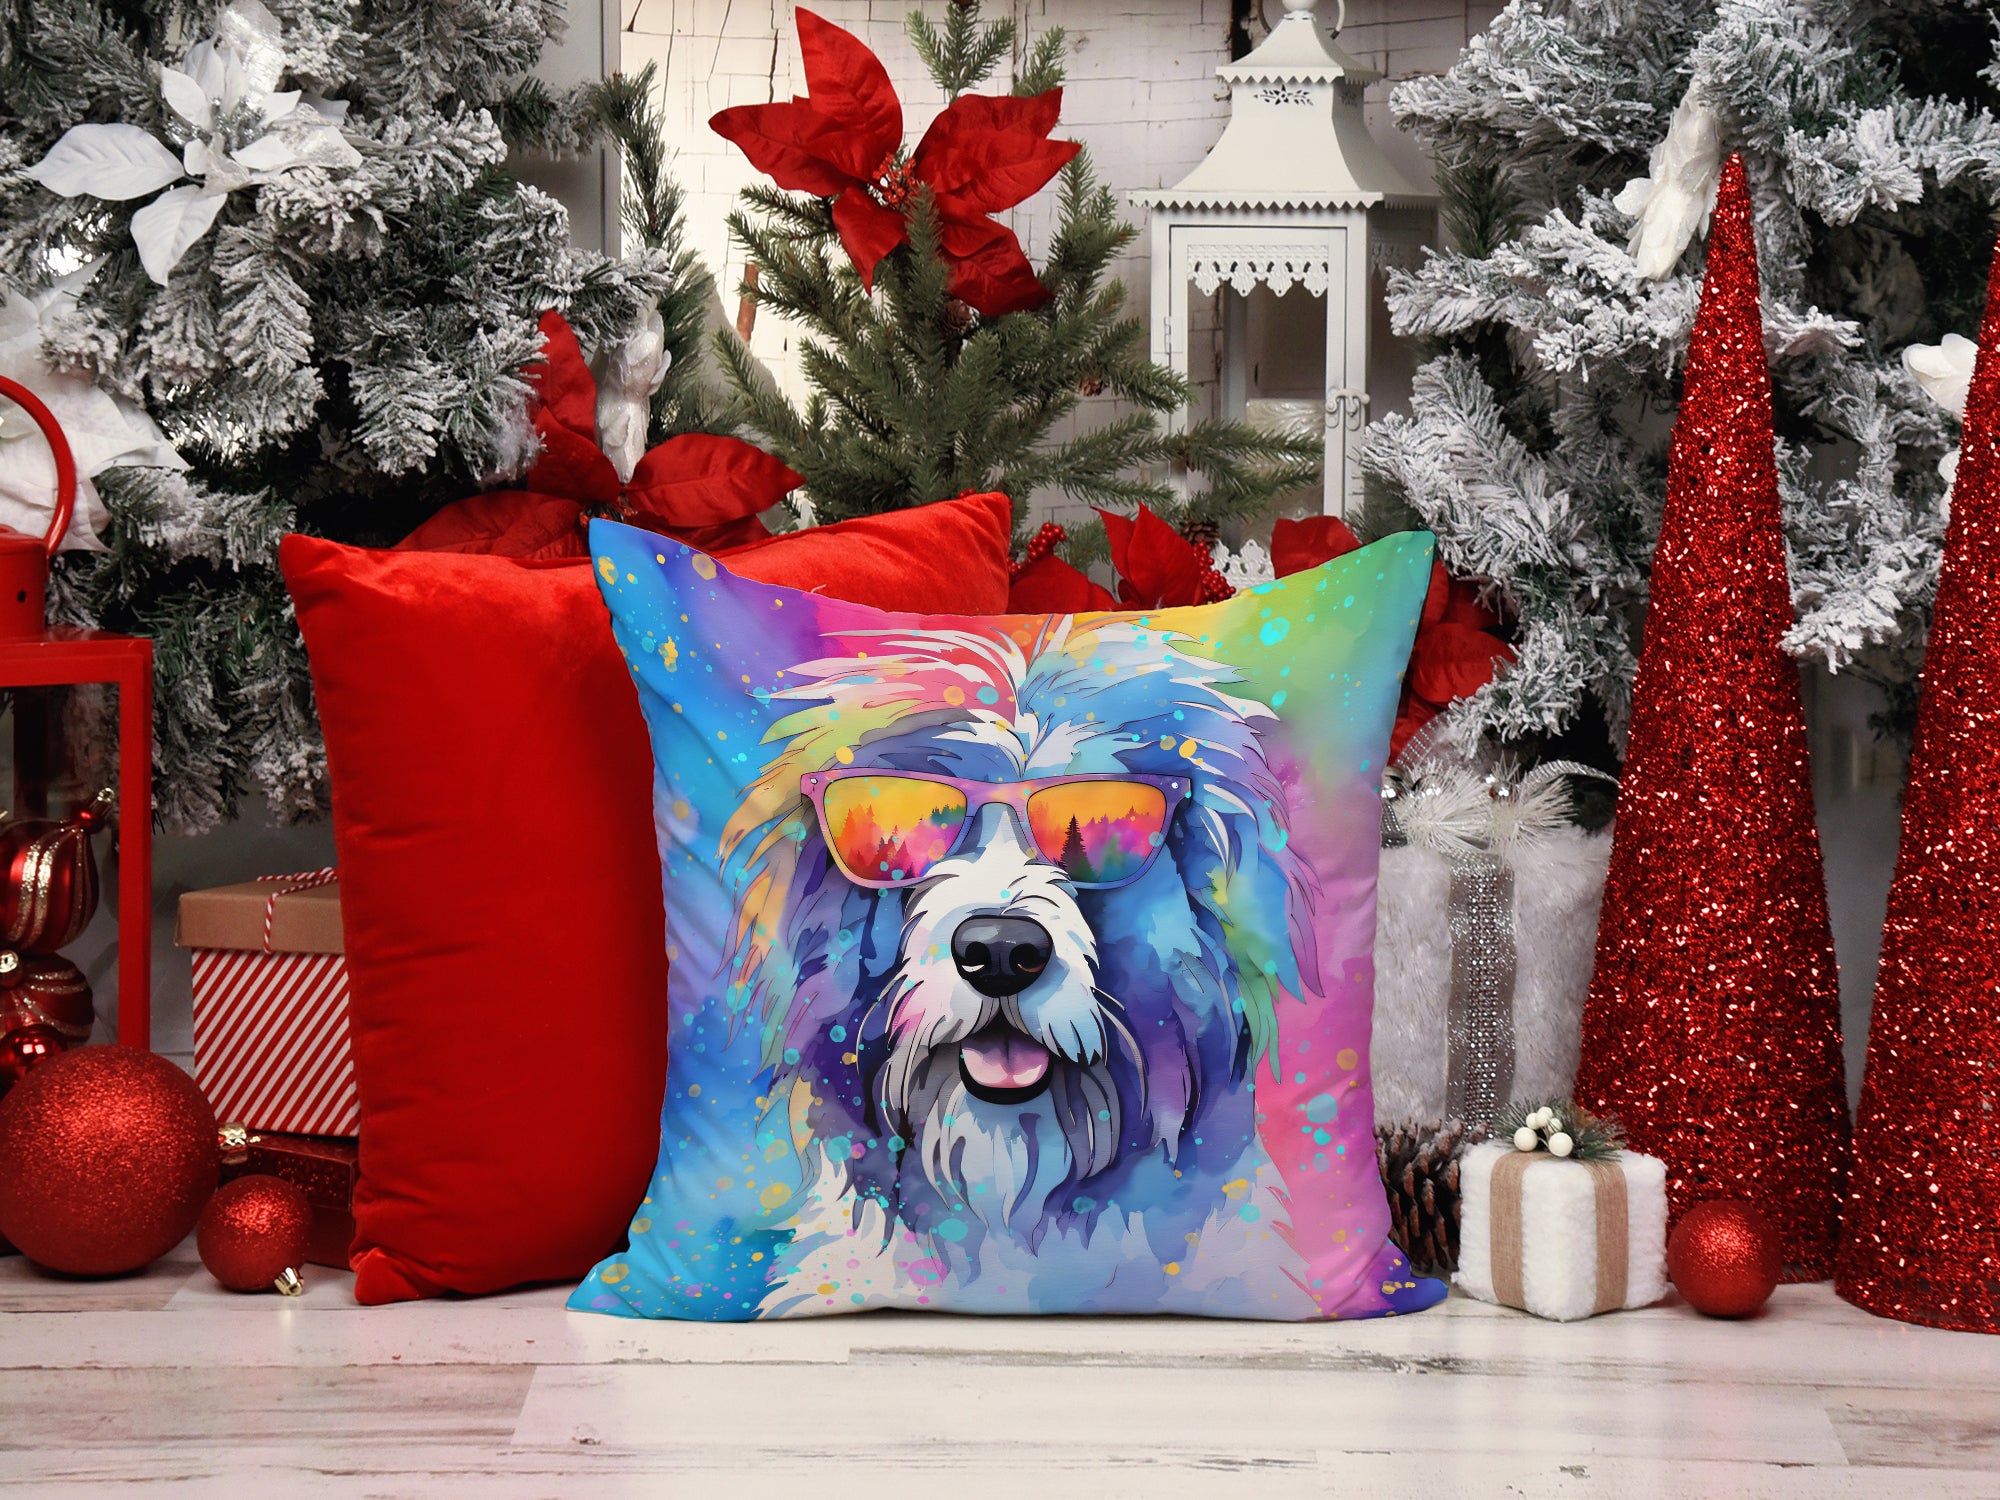 Buy this Old English Sheepdog Hippie Dawg Fabric Decorative Pillow